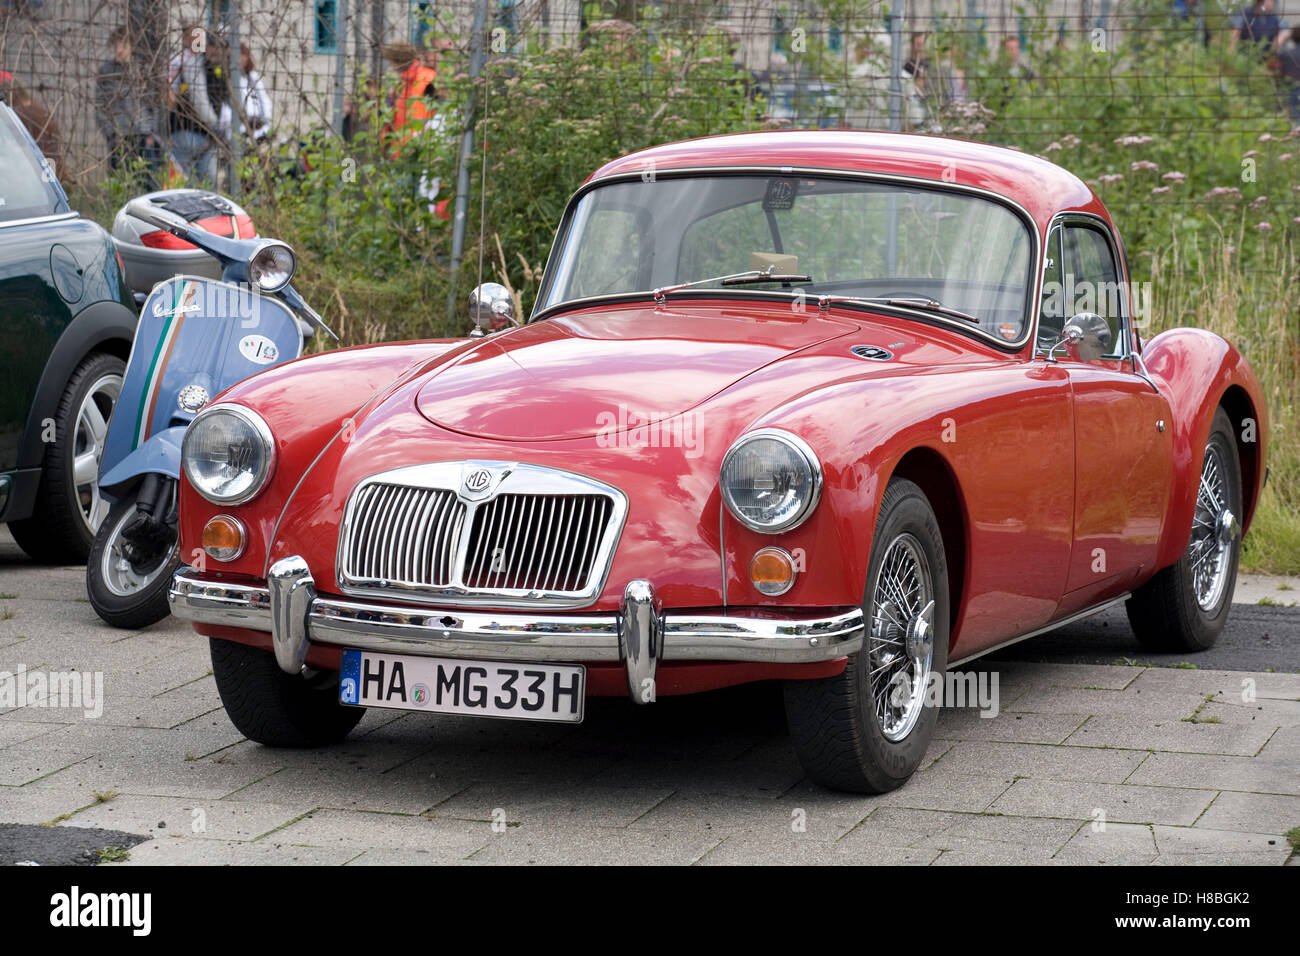 Germany, North Rhine-Westphalia, participant of a vintage car rally, a MG from 1960. Stock Photo